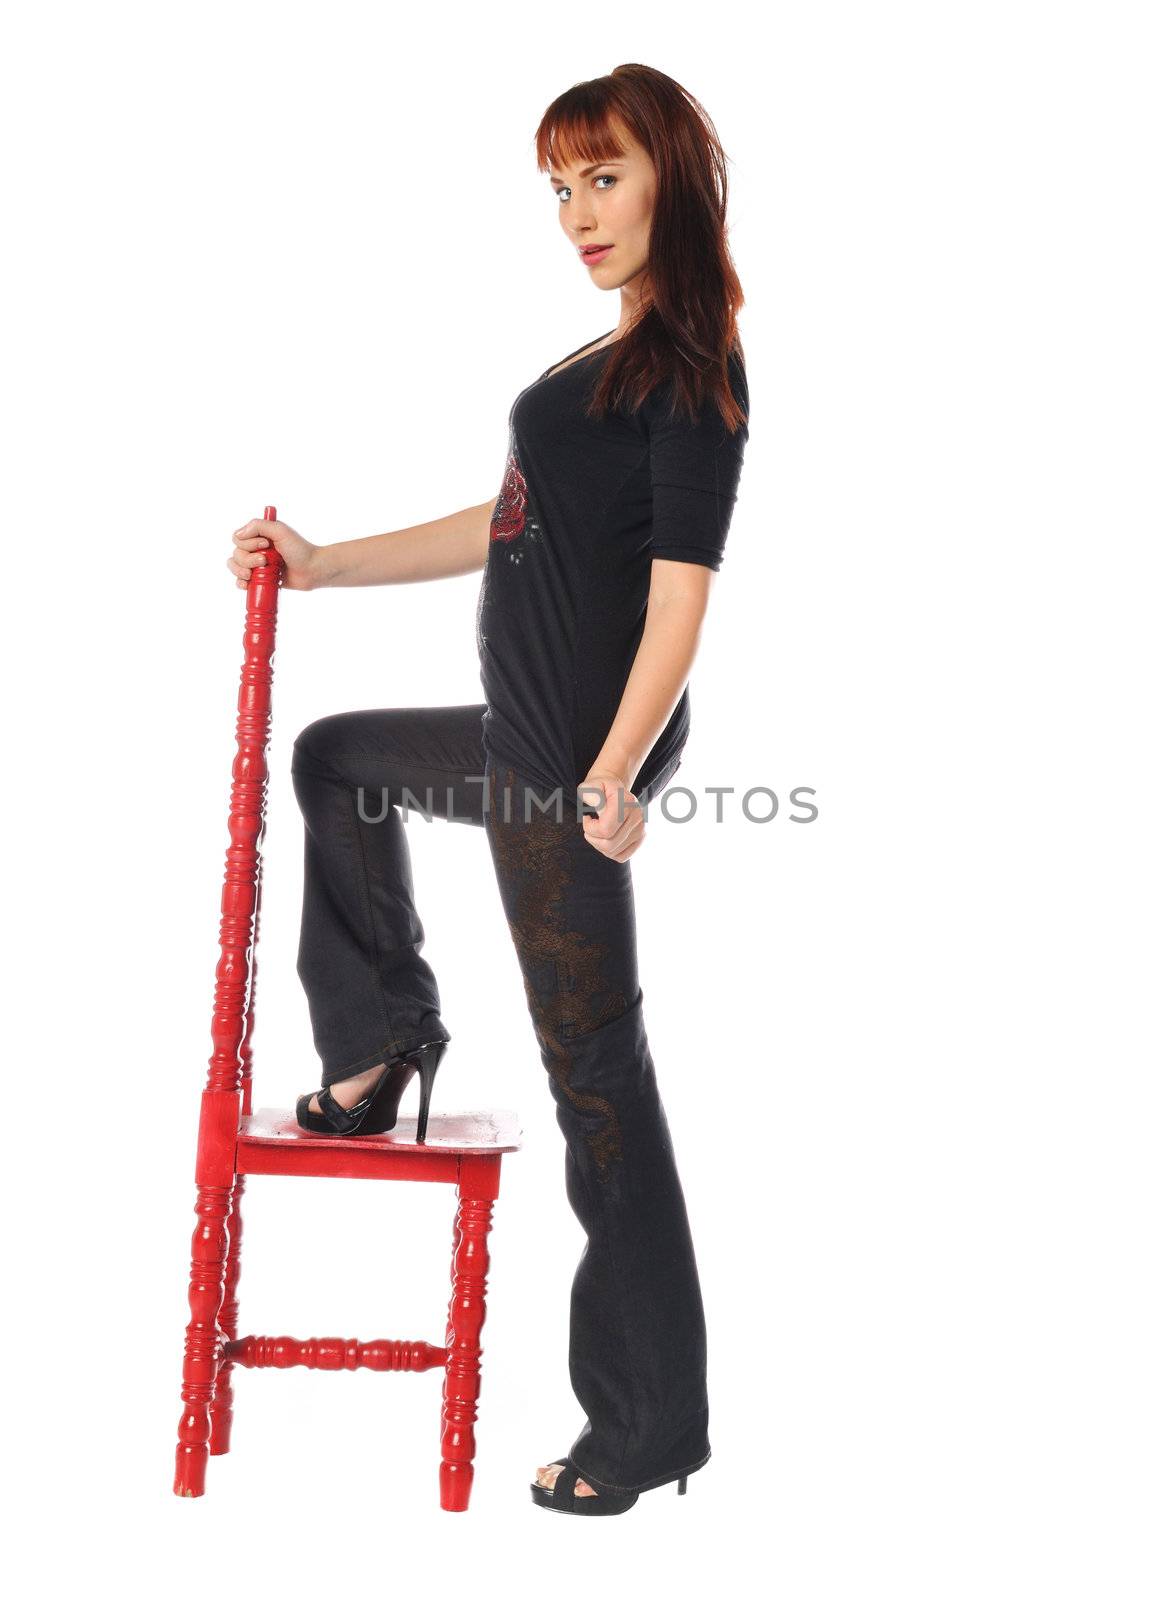 Attractive young woman in a tall back chair on a white background